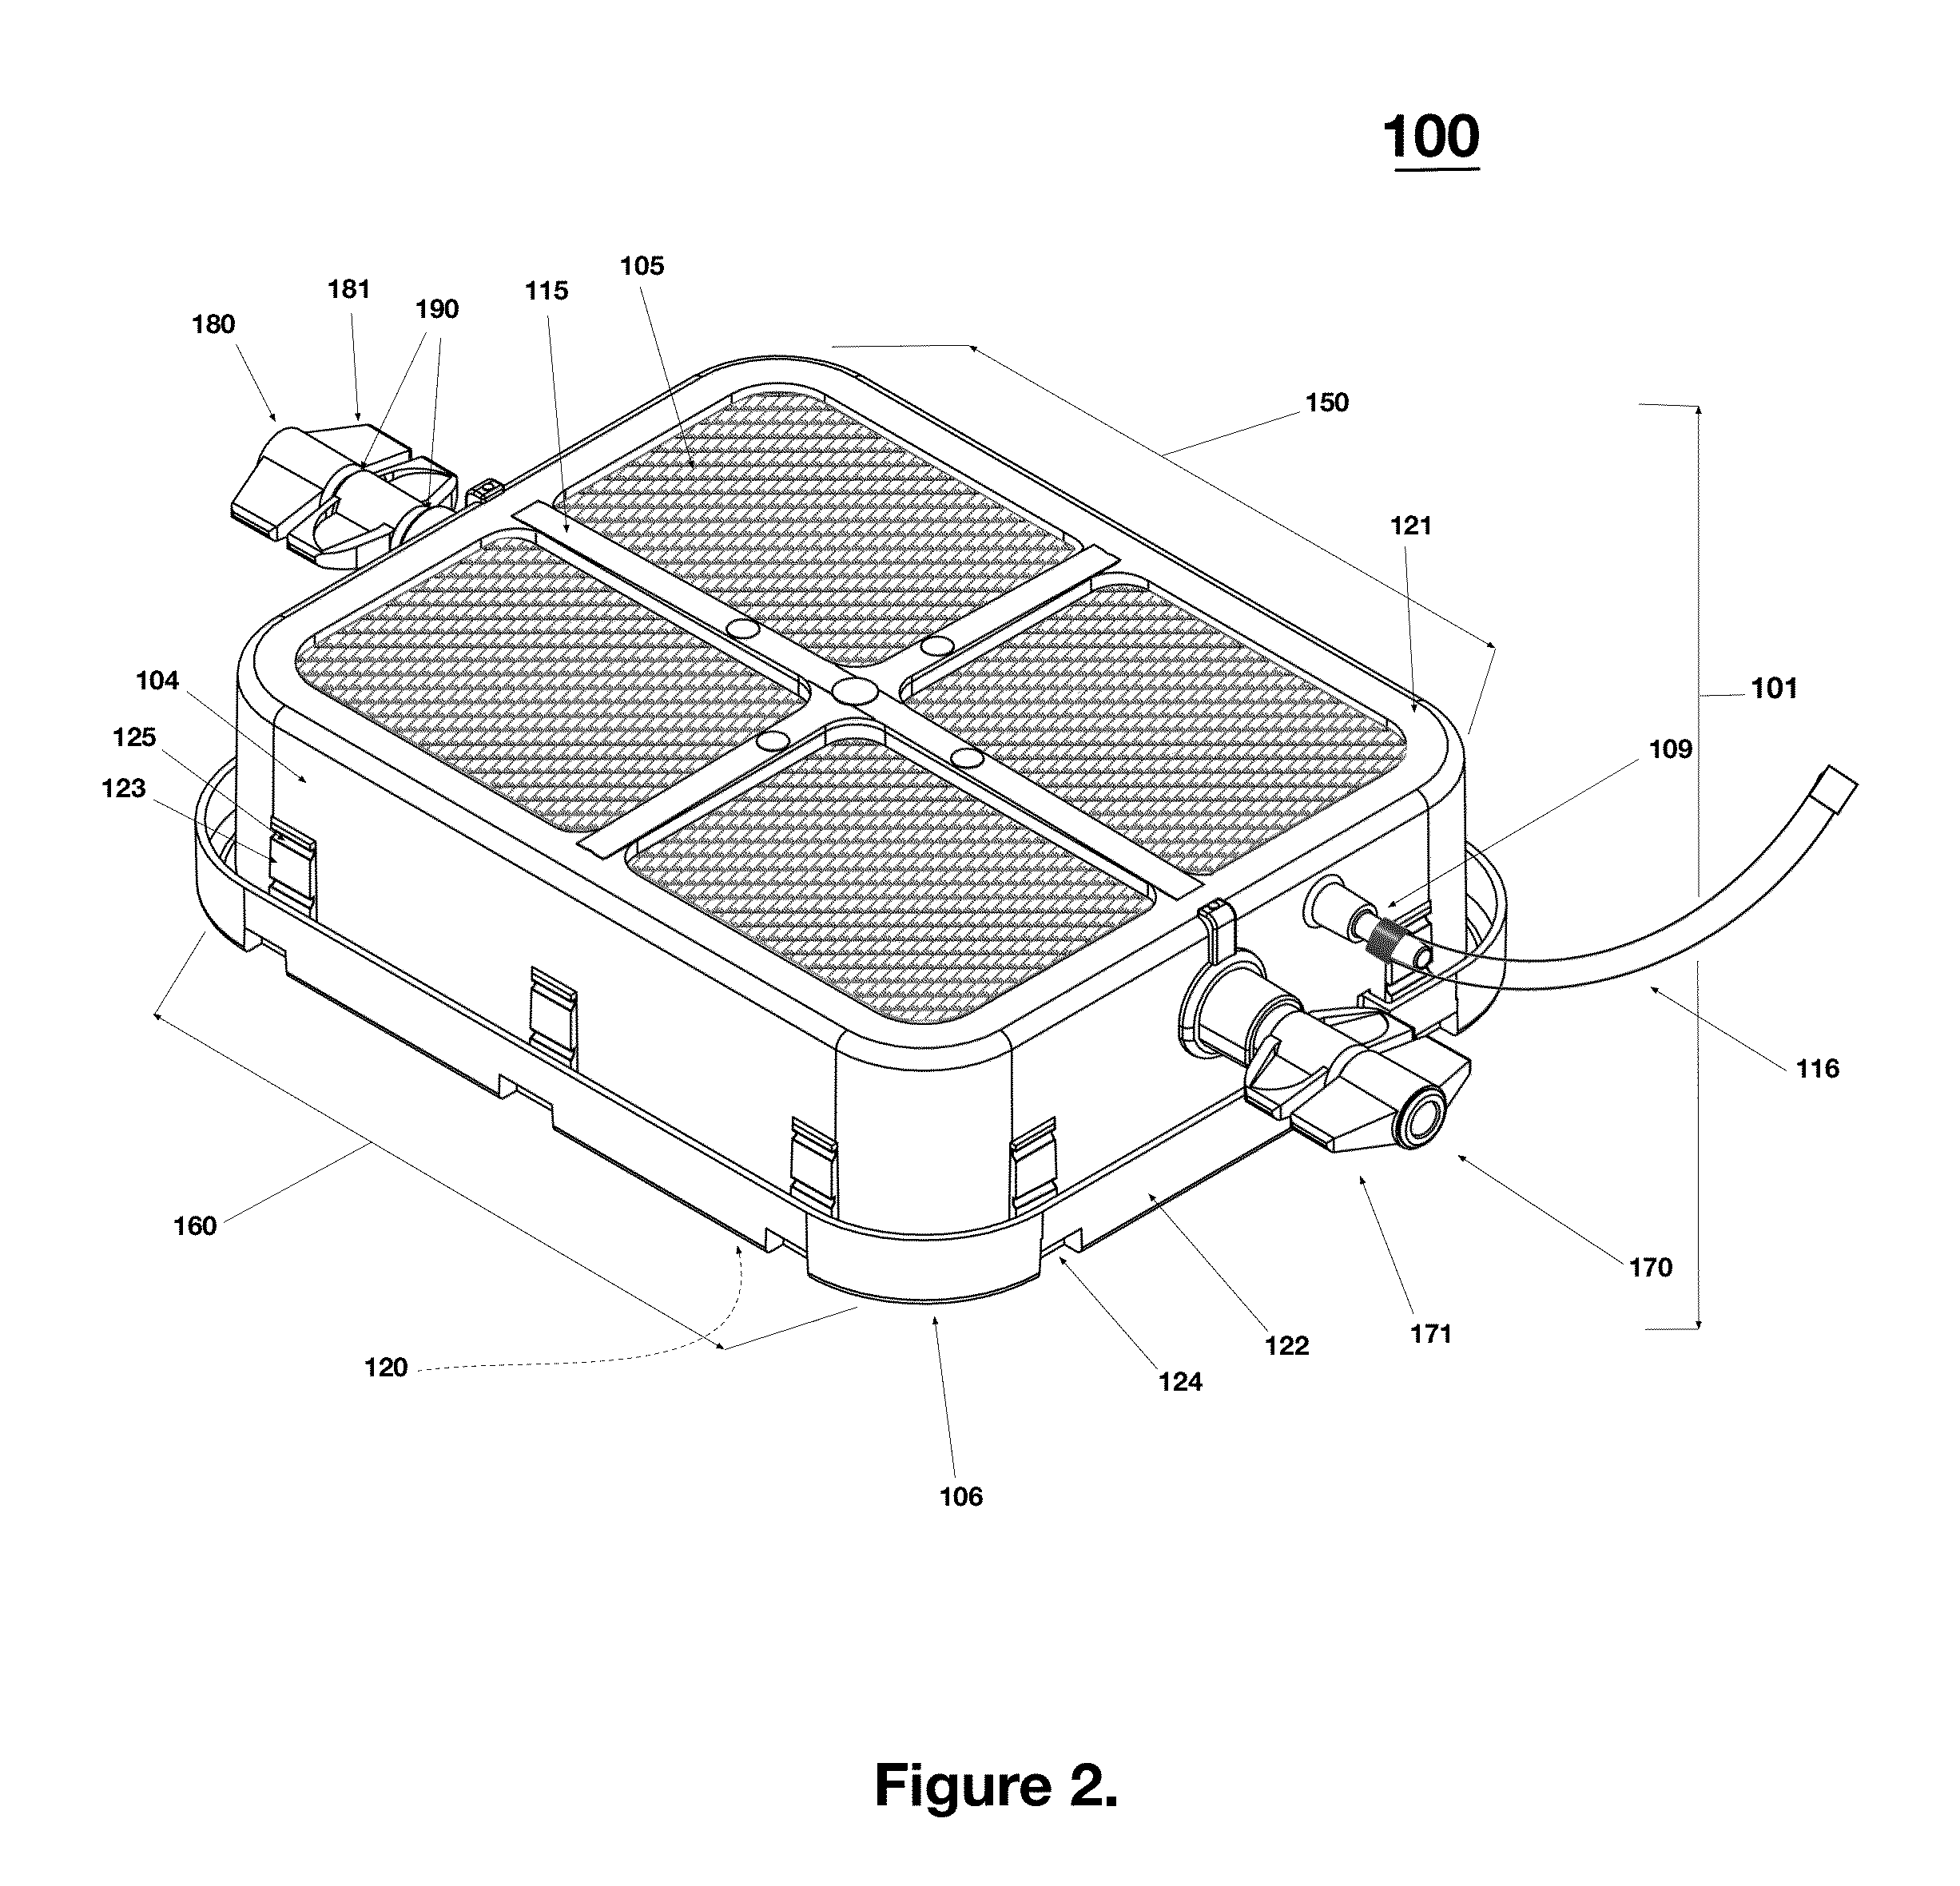 Low Aspect Ratio Staged Closure Devices, Systems, and Methods for Freeze-Drying, Storing, Reconstituting, and Administering Lyophilized Plasma